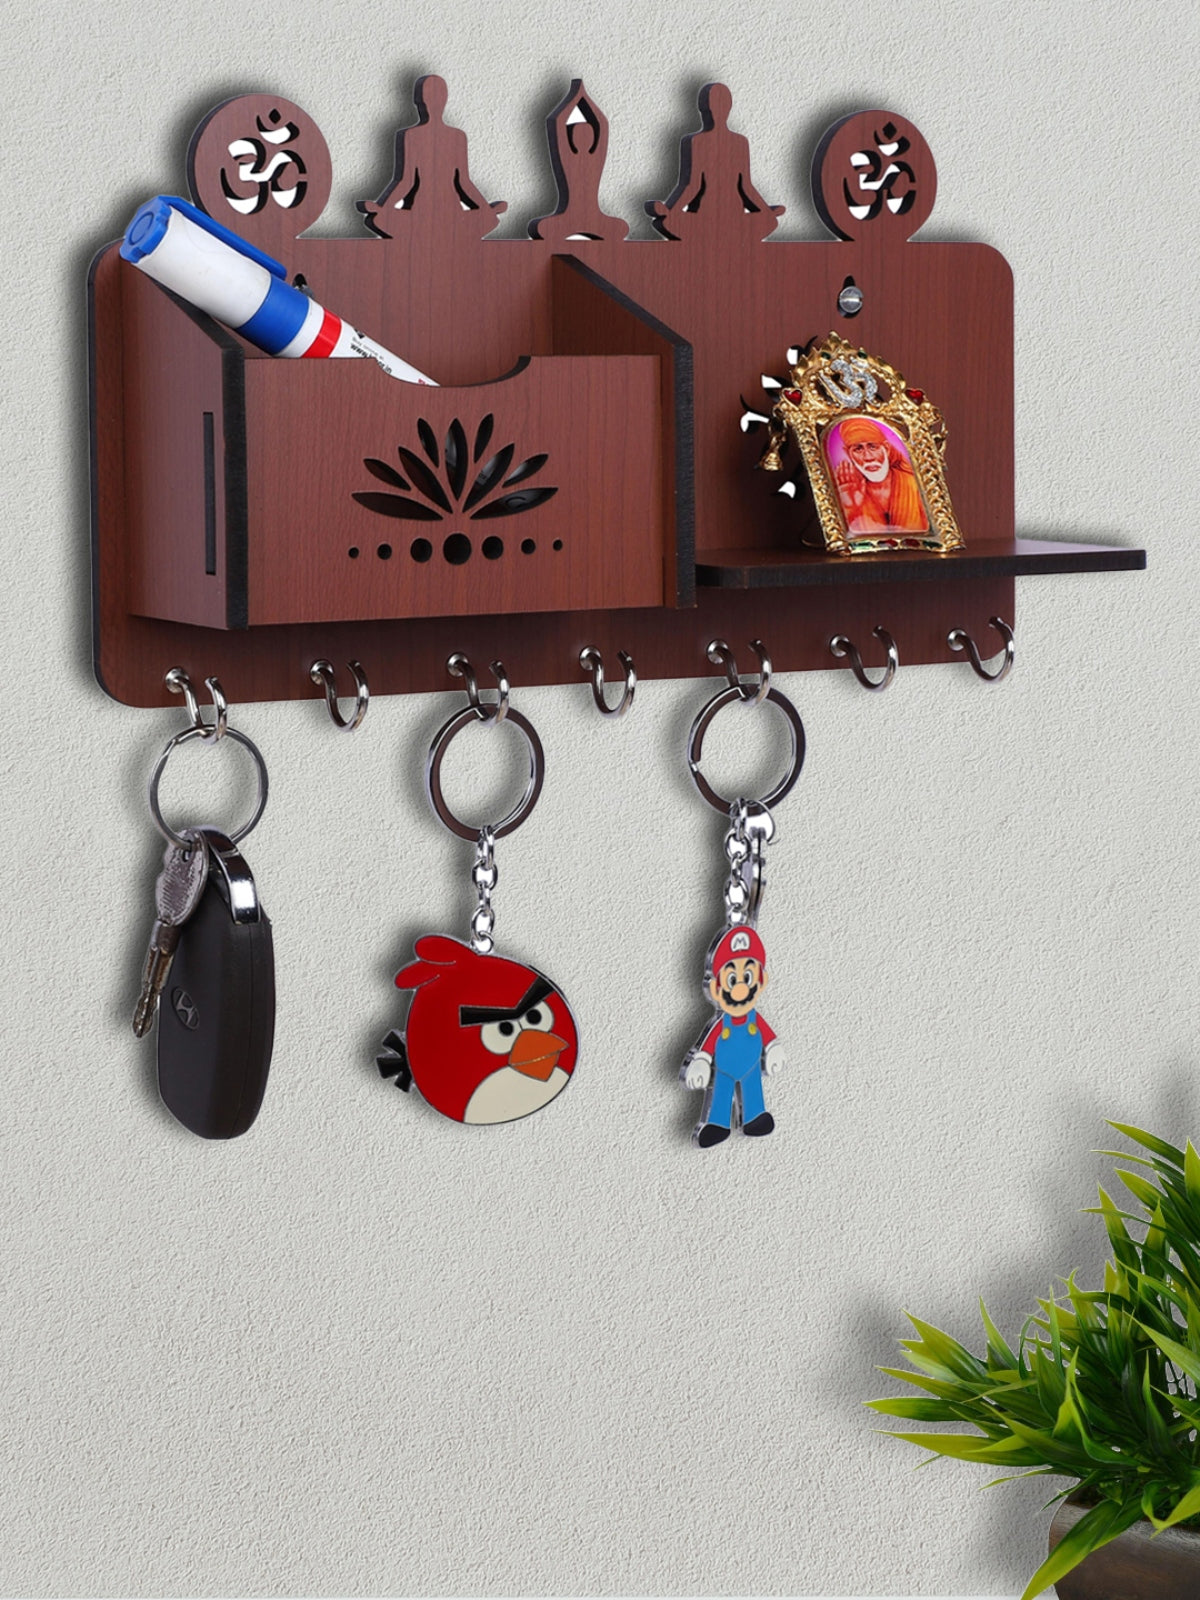 Wooden Key Holder With 1 Shelf & 1 Mobile Stand Holder For Home & Office Wall Decorative